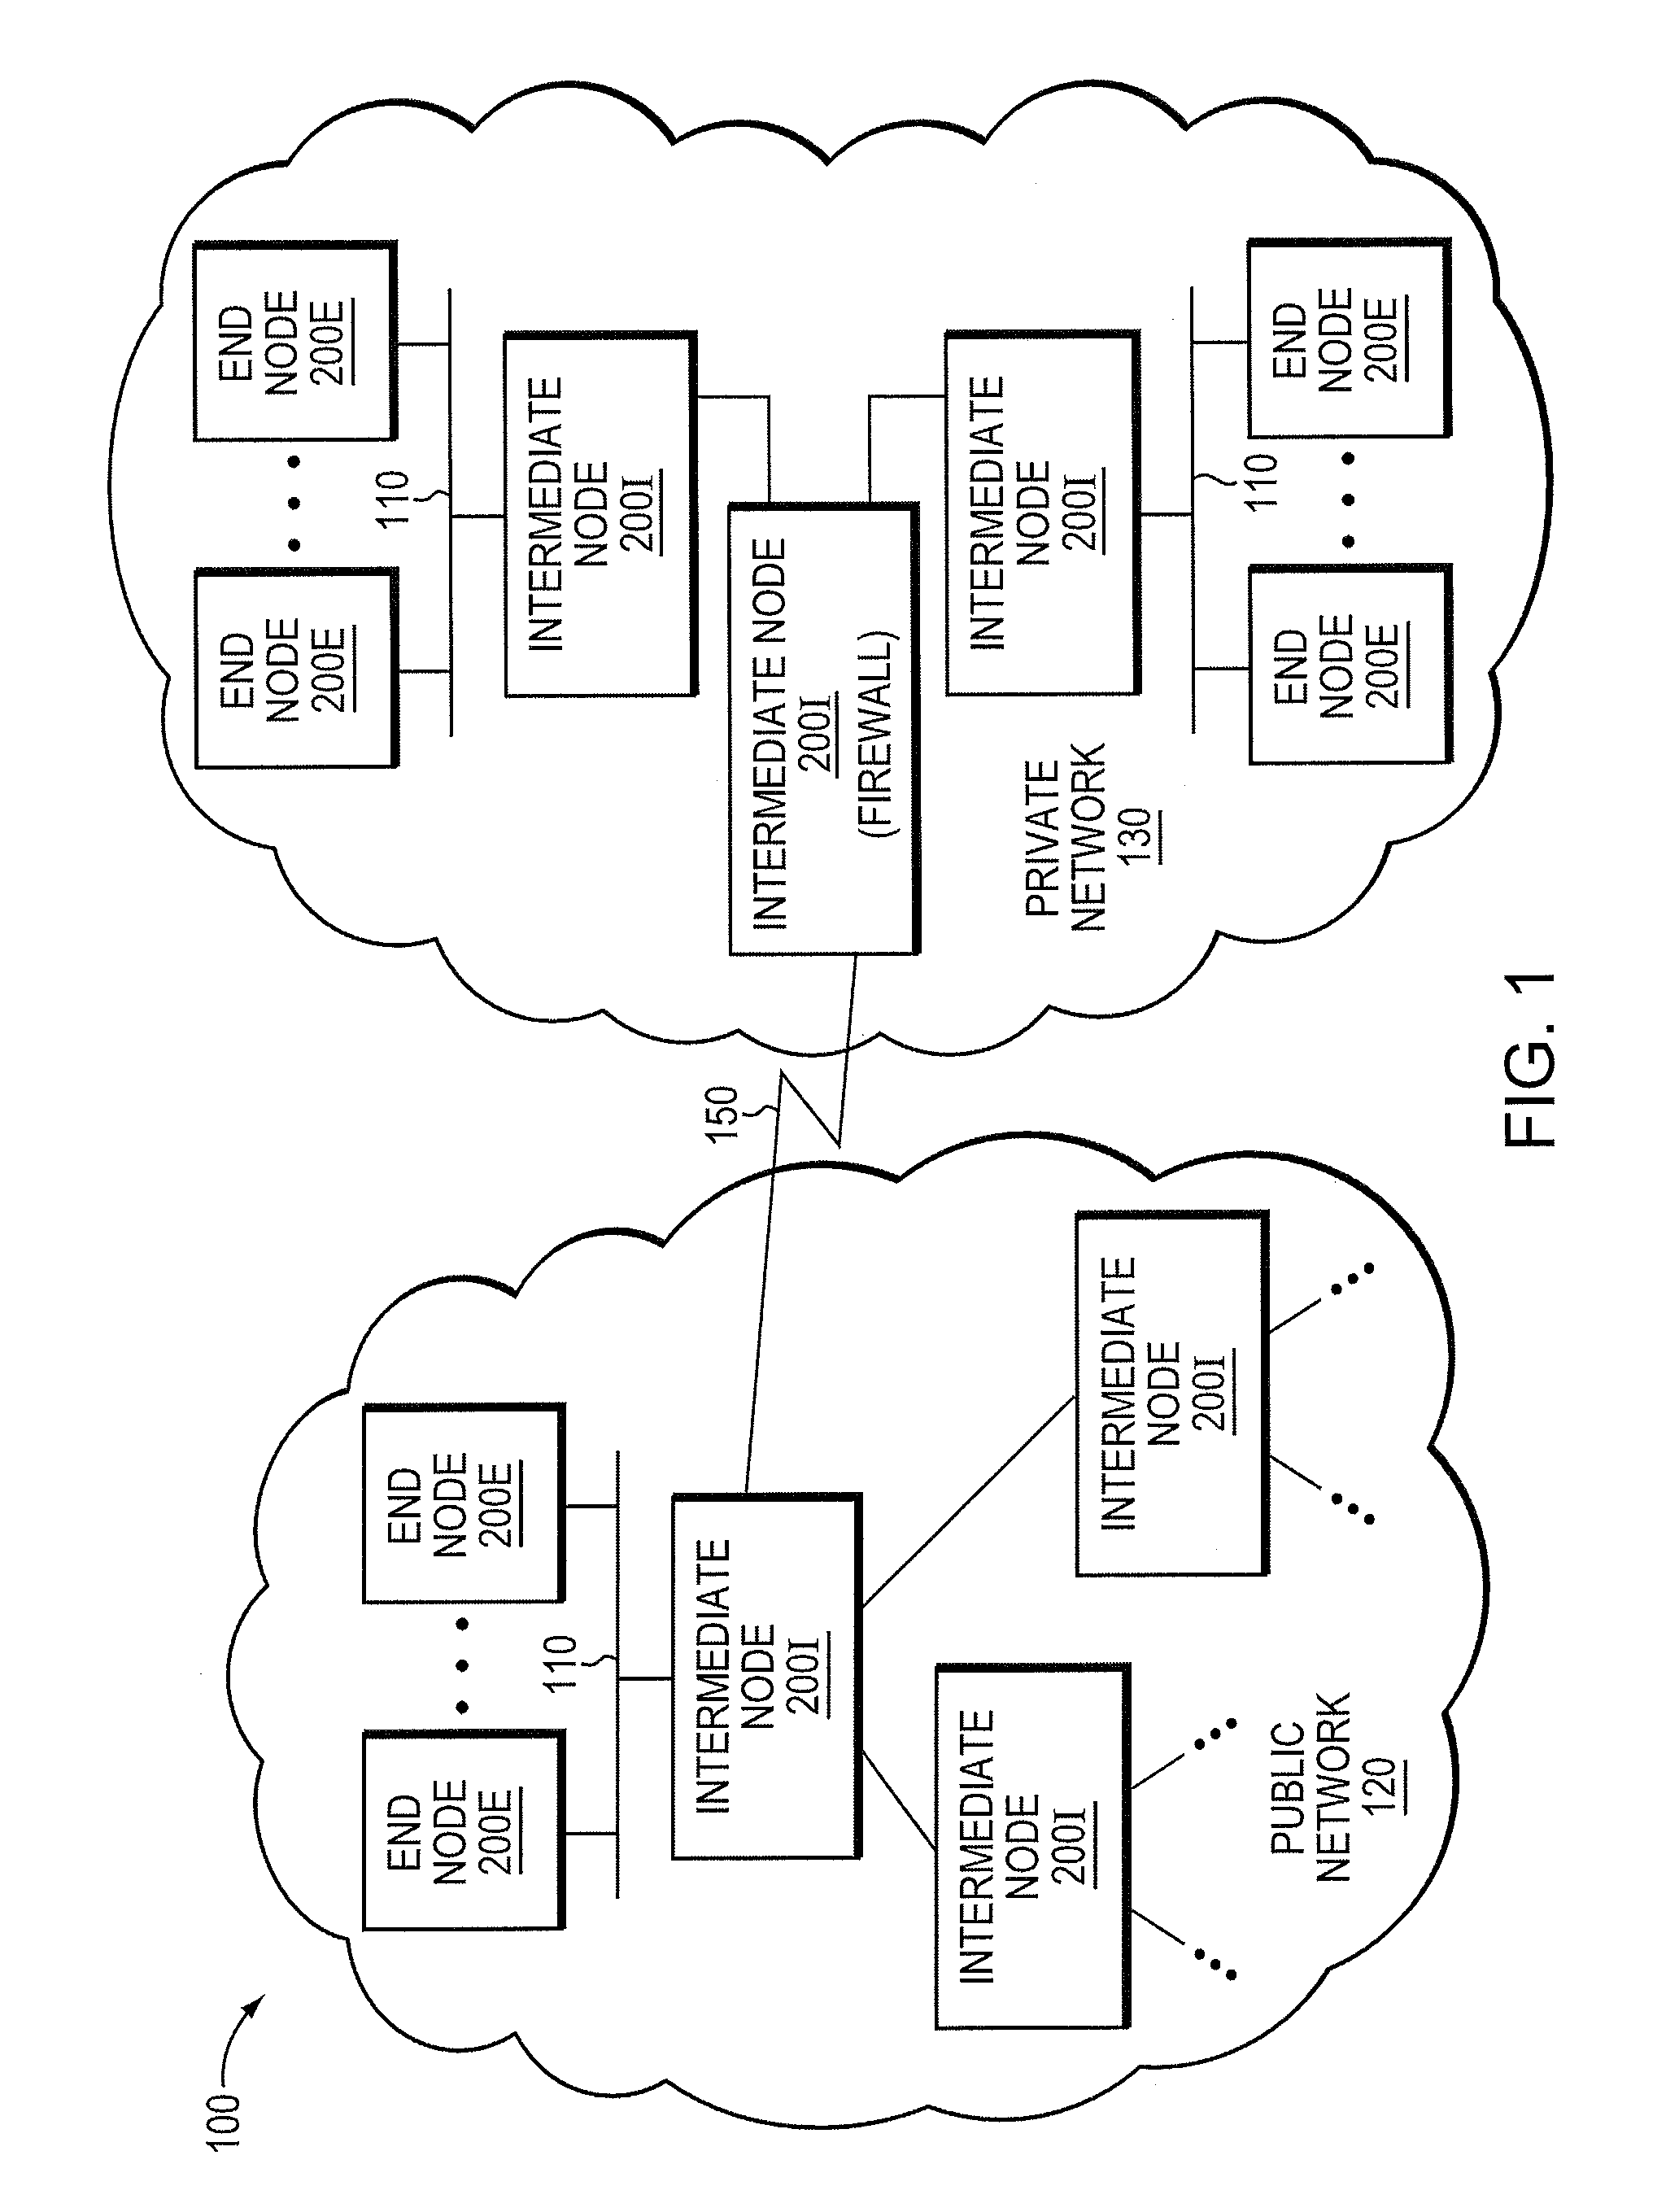 Micro-virtualization architecture for threat-aware microvisor deployment in a node of a network environment